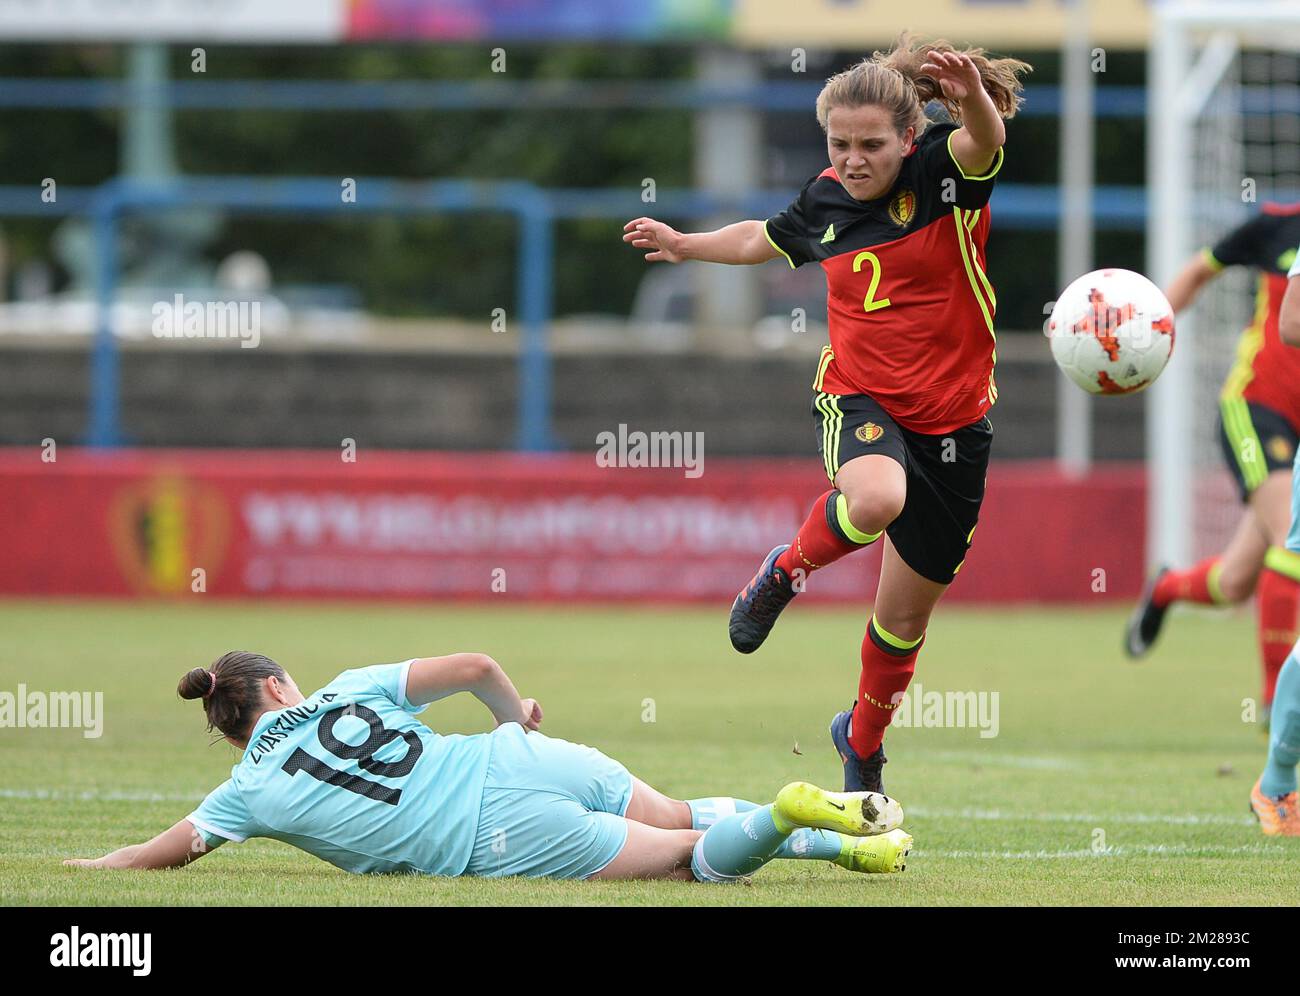 Belgium's Davina Philtjens avoids the tackle from Russian Elvira Ziyastinova during a friendly game between the Belgian national women's soccer team Red Flames and Russia, on Tuesday 11 July 2017 in Denderleeuw. The Red Flames are preparing for the Women's European Championship 2017 in the Netherlands. BELGA PHOTO DAVID CATRY Stock Photo